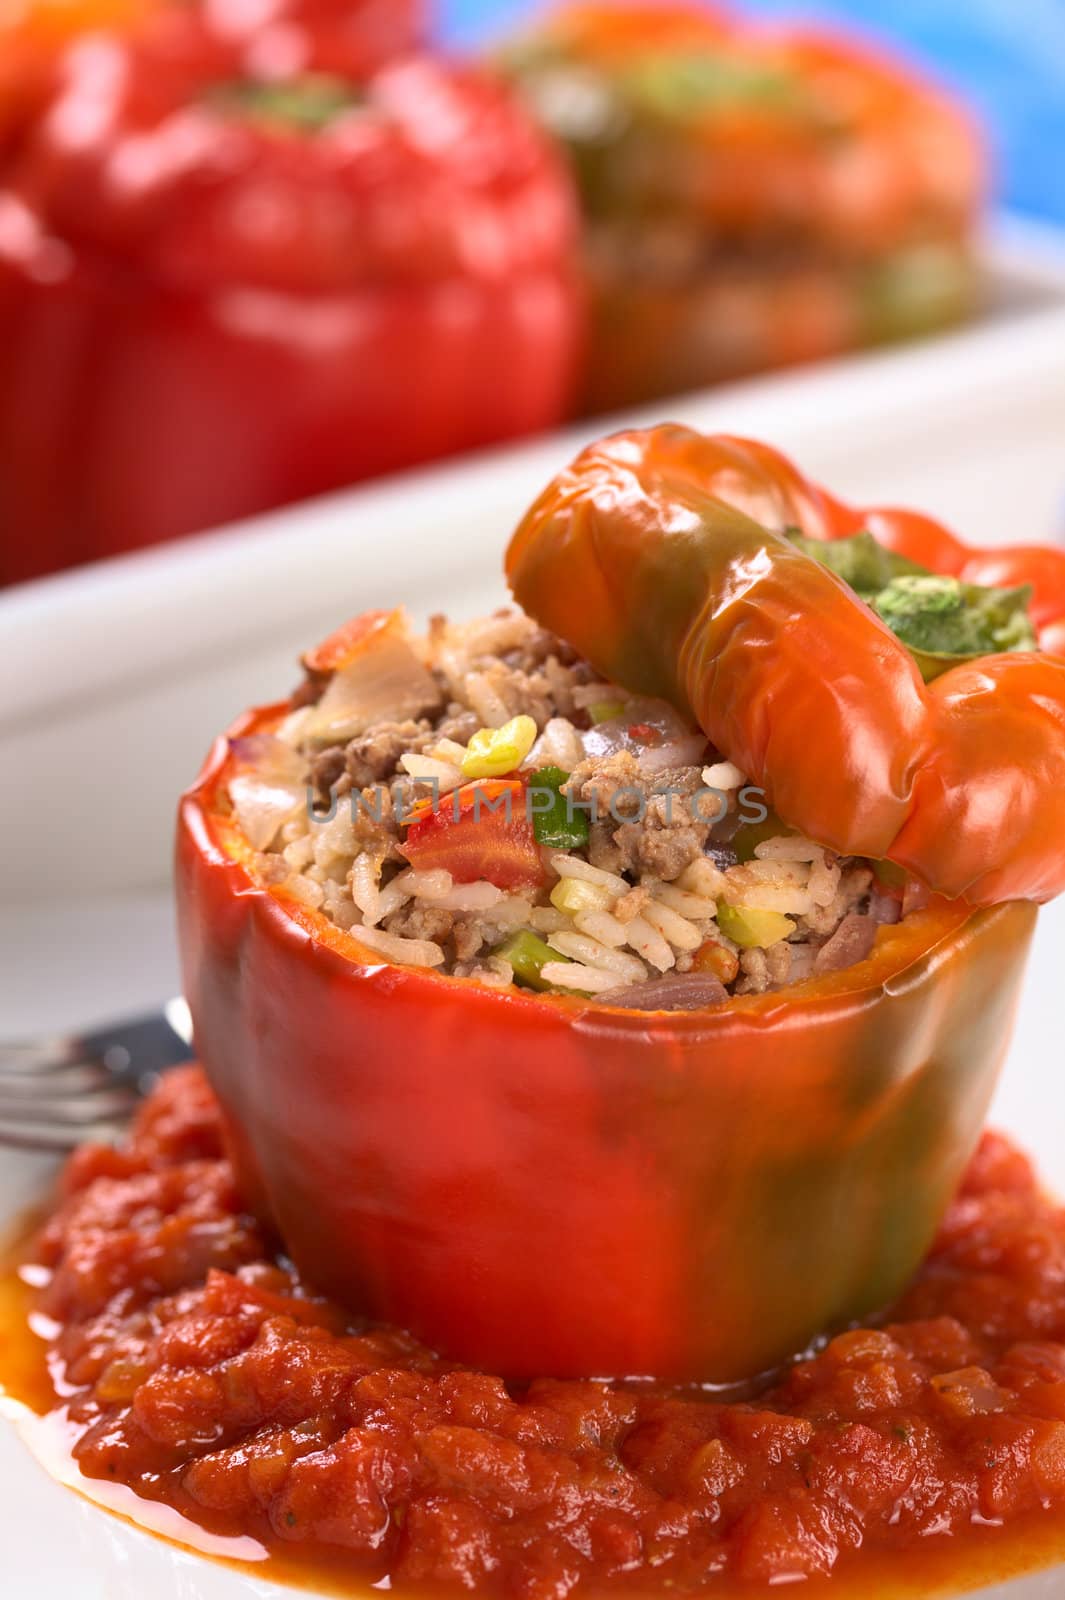 Baked stuffed red bell pepper filled with minced meat, onion, rice, tomato and green onion served on tomato sauce with casserole in the back (Selective Focus, Focus on the tomato piece and the stuffing around it on the top)